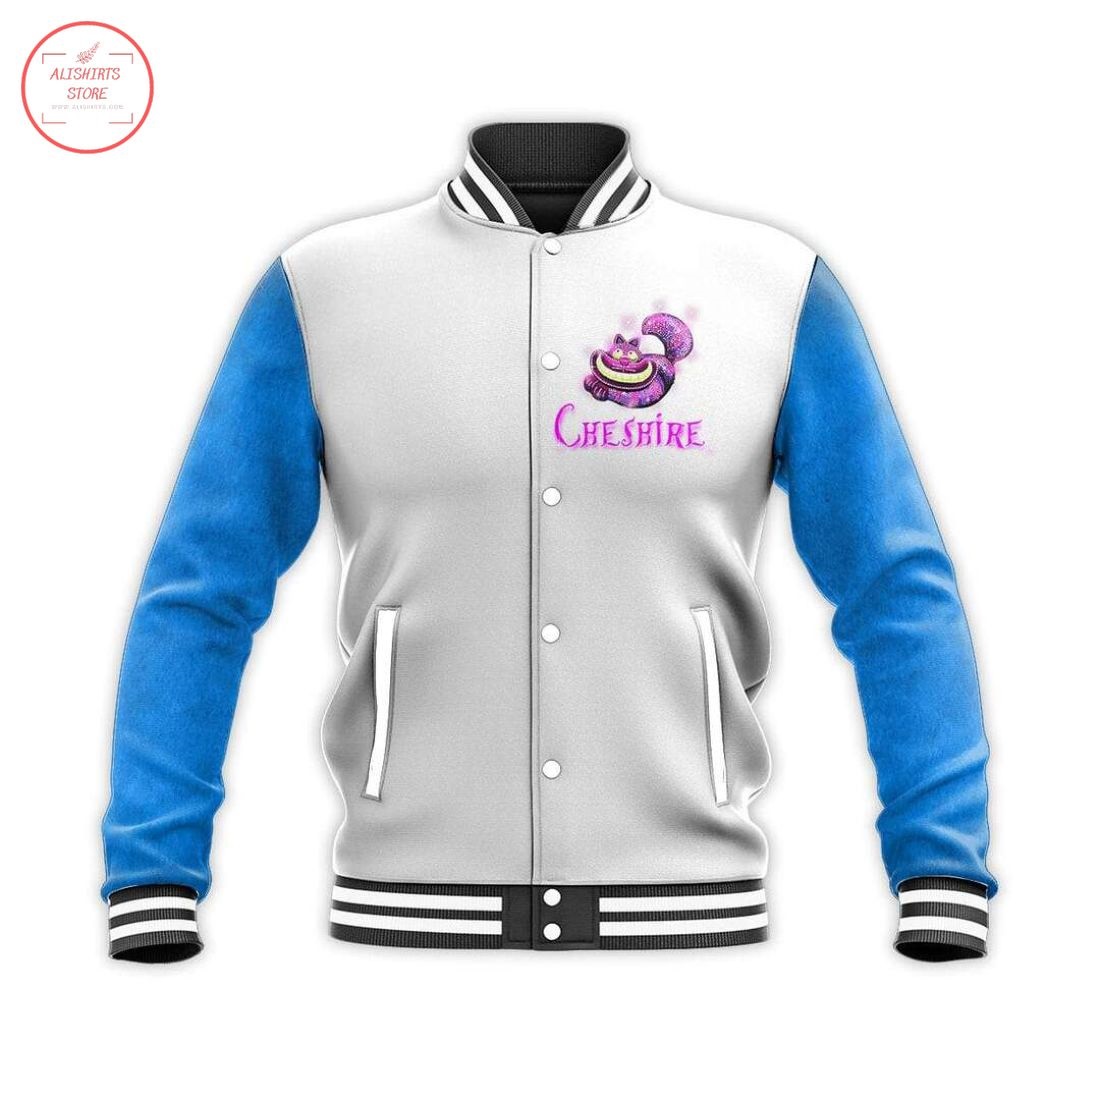 The Cheshire Mad Cat Letterman Jacket